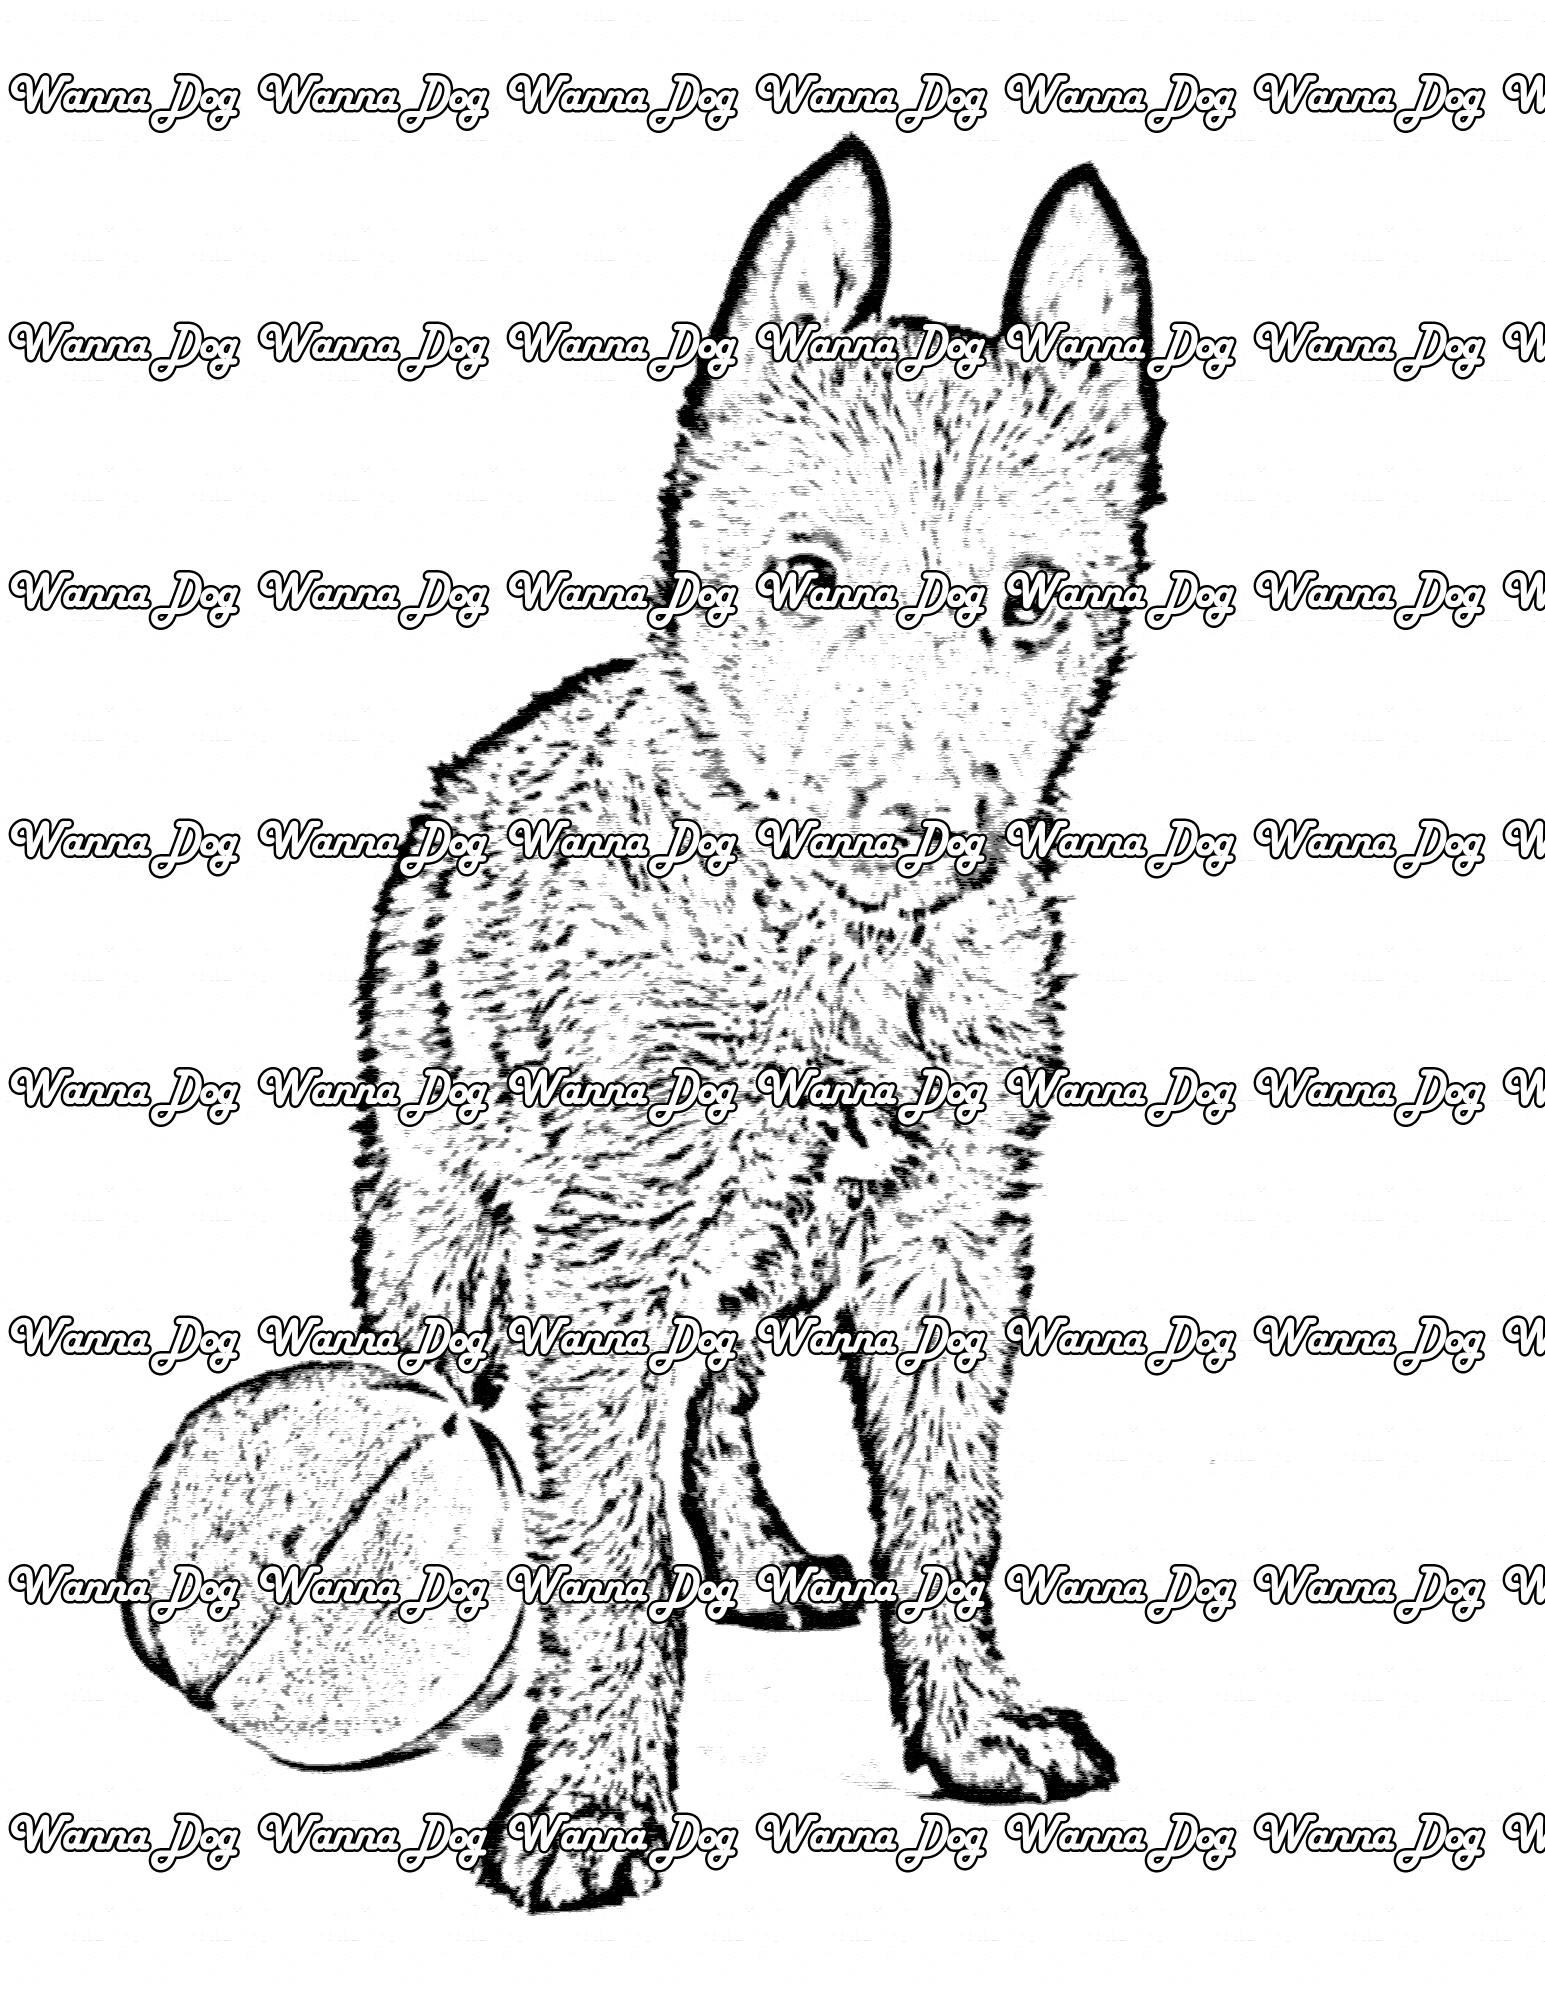 Belgian Malinois Coloring Page of a Belgian Malinois puppy standing with a beach ball